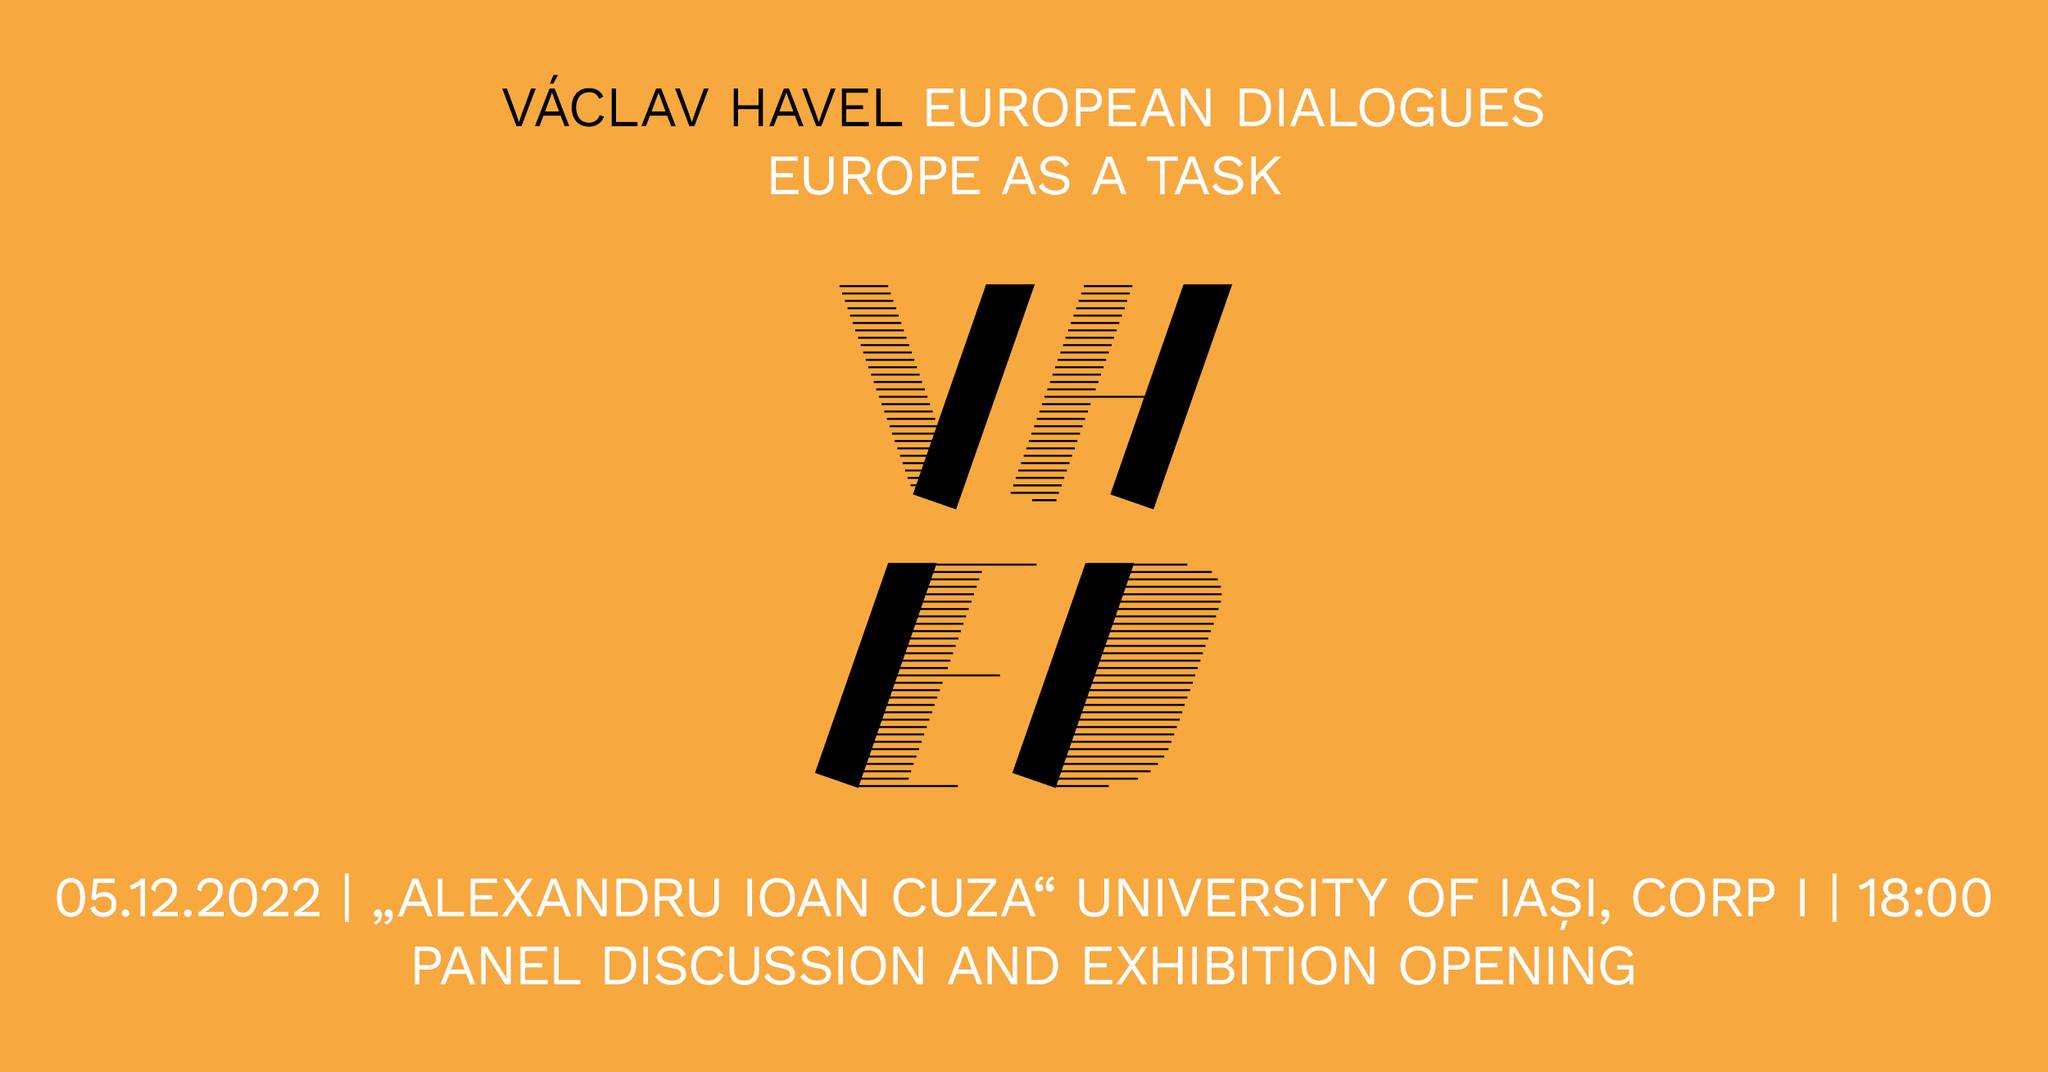 Europe as a task - discussion and exhibition